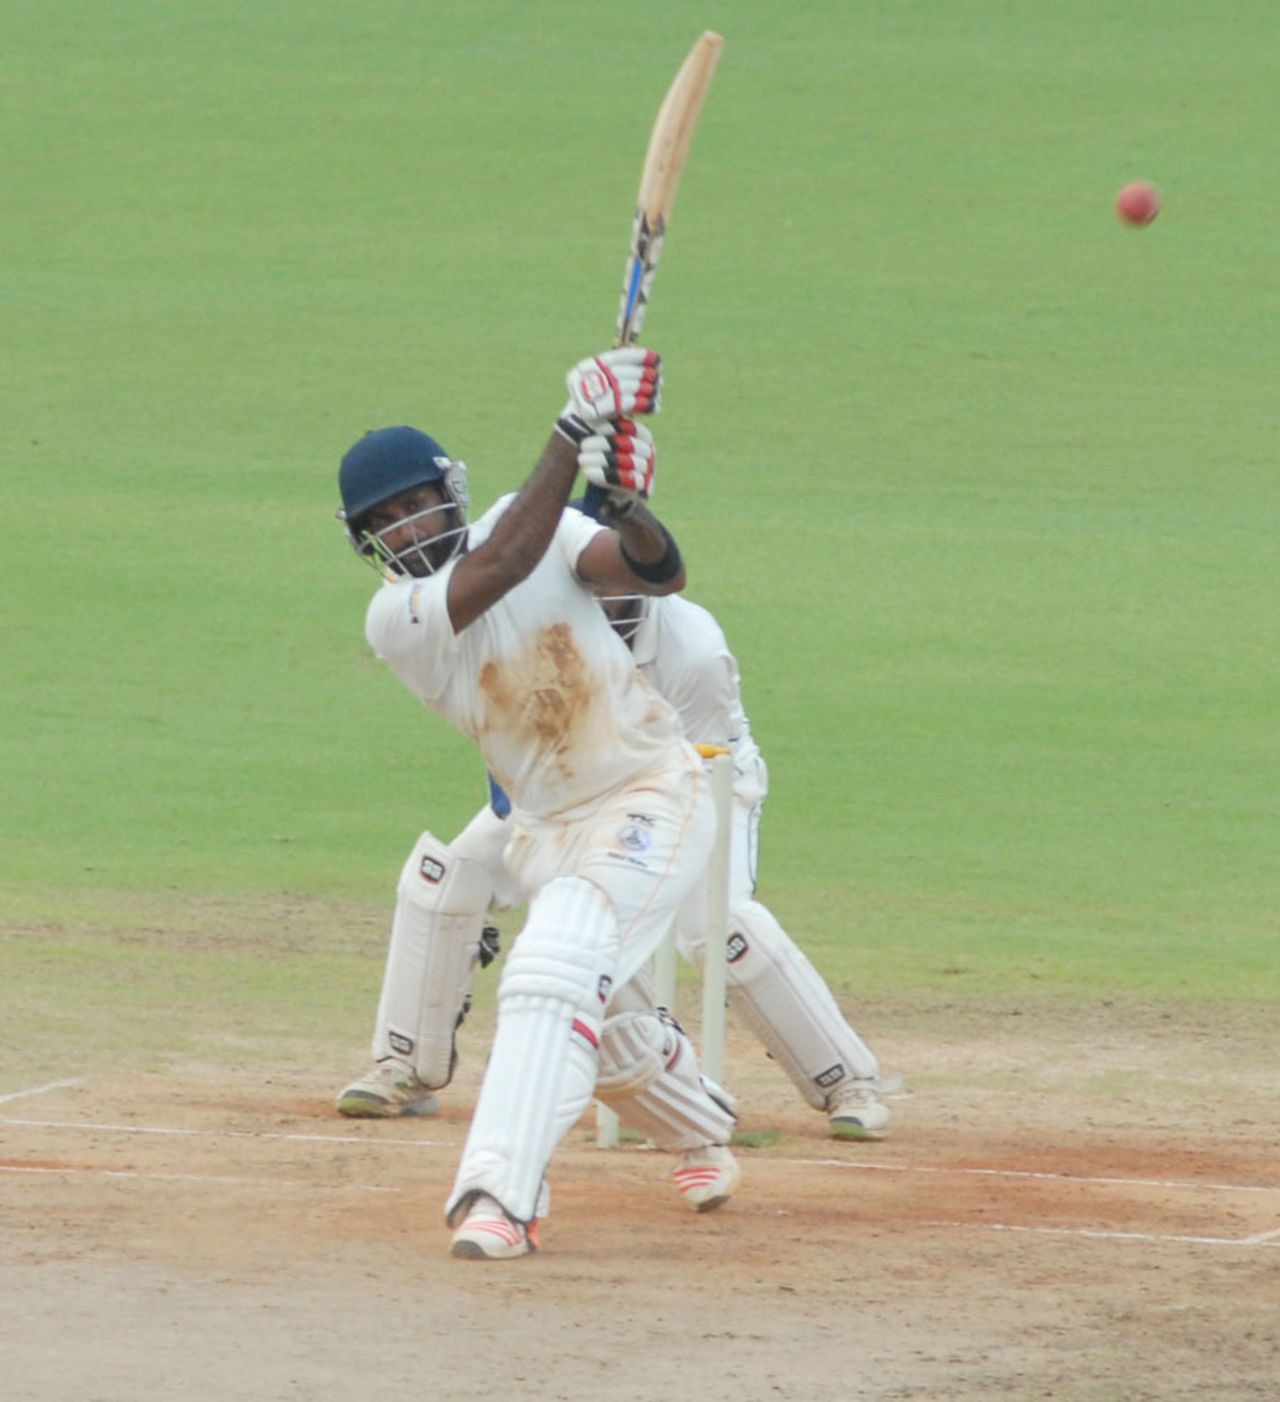 R Sathish launches one down the ground during his 33, Tamil Nadu v Andhra, Group B, Ranji Trophy, November 8, 2015